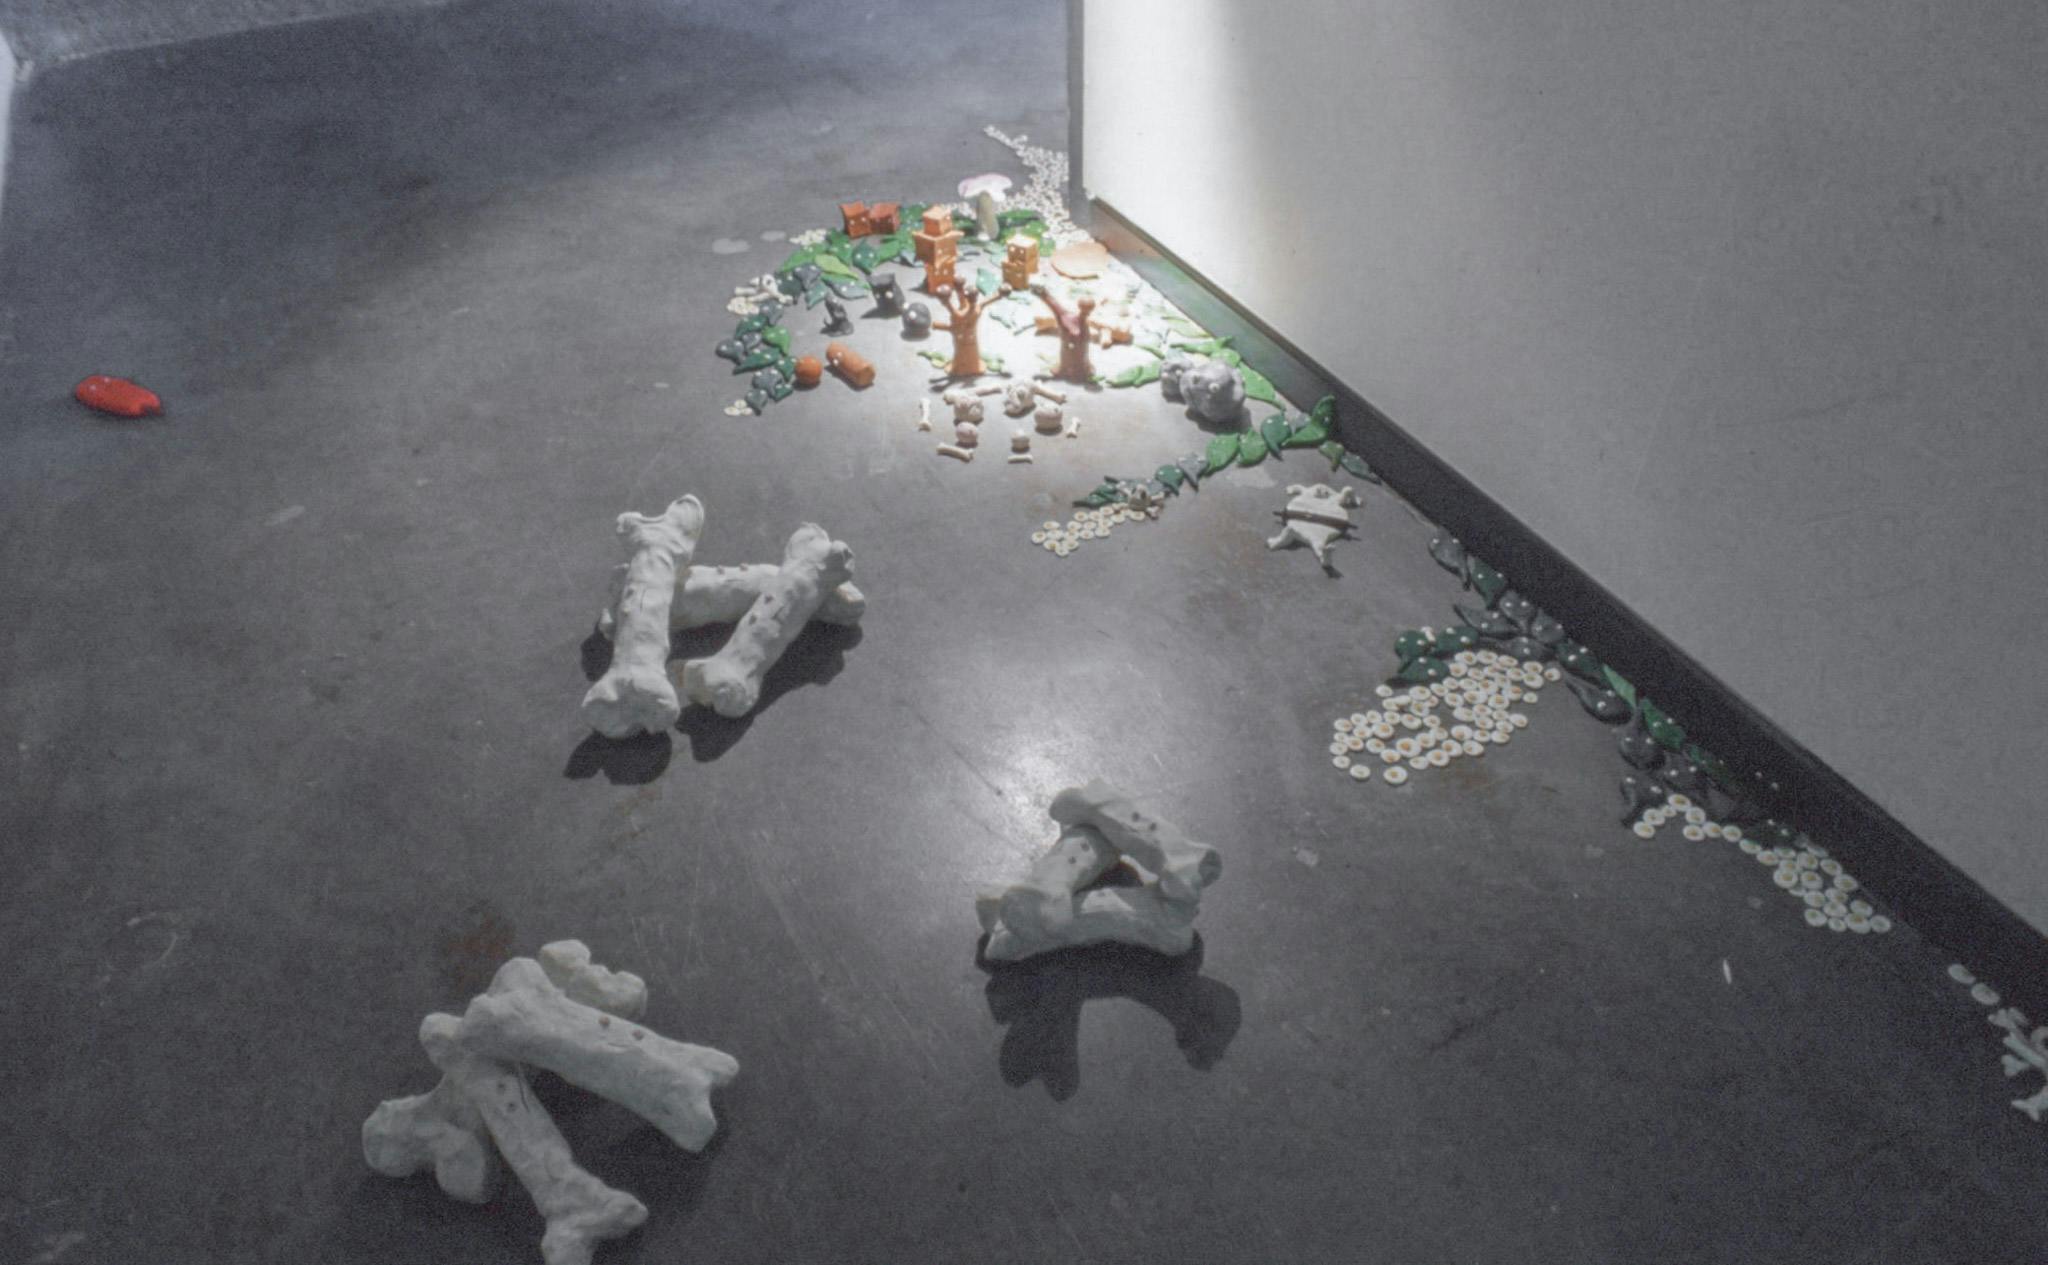 A series of small sculpture-like artworks are installed on a floor. A number of fried-egg shaped objects, bones, and small green round objects are piled up around the corner of the room.